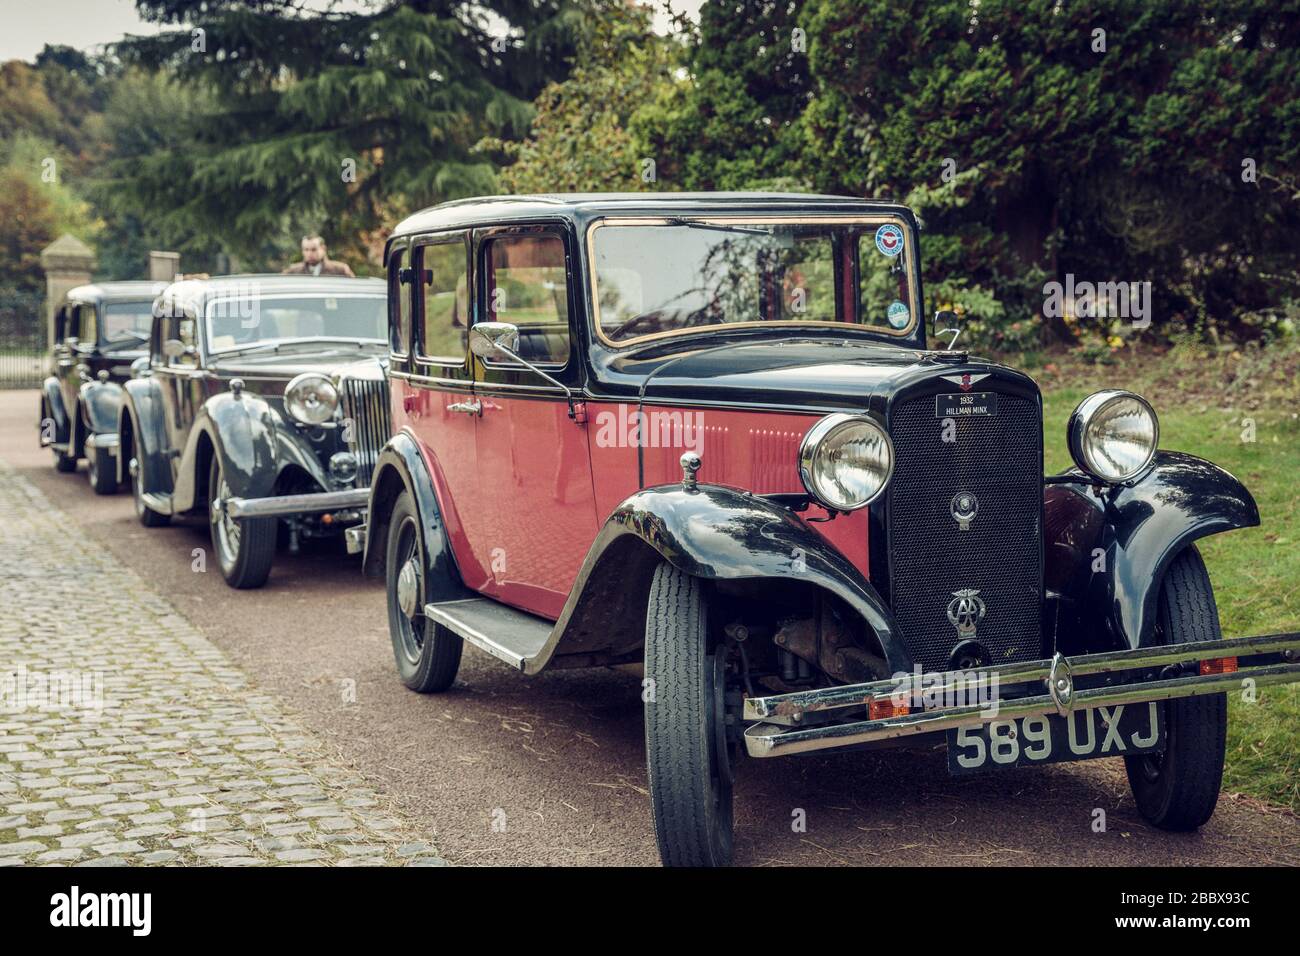 A line of vintage motor cars headed by a 1932 Hillman Minx 589 UXJ, Papplewick Pumping Station 1940's event, England Stock Photo